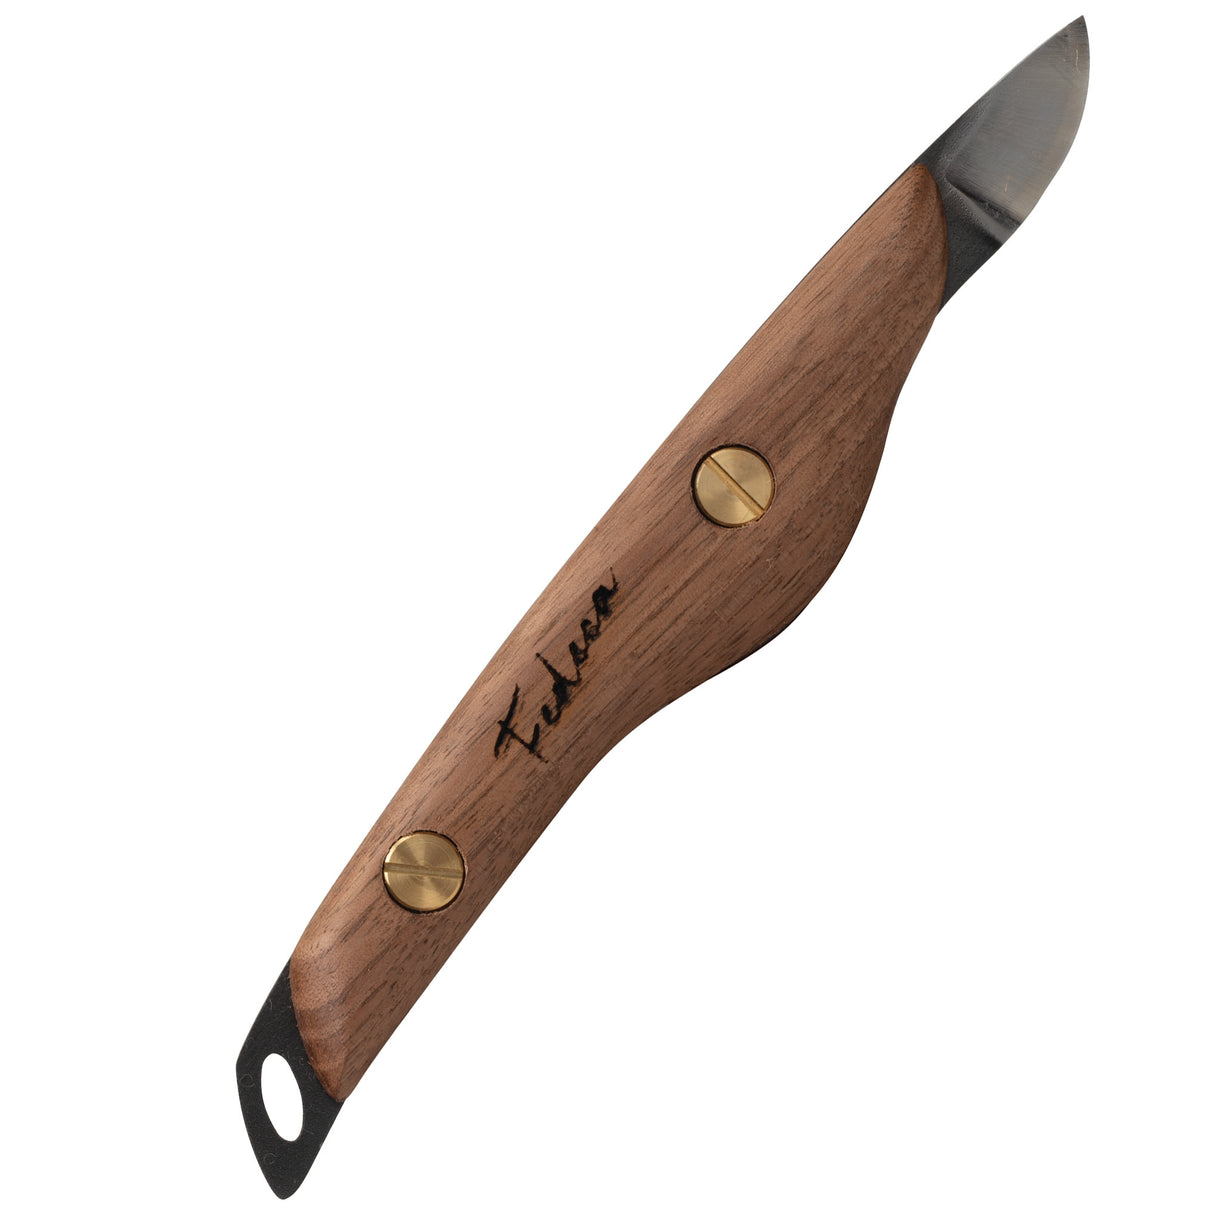 Leather Craft Knife by Fedeca